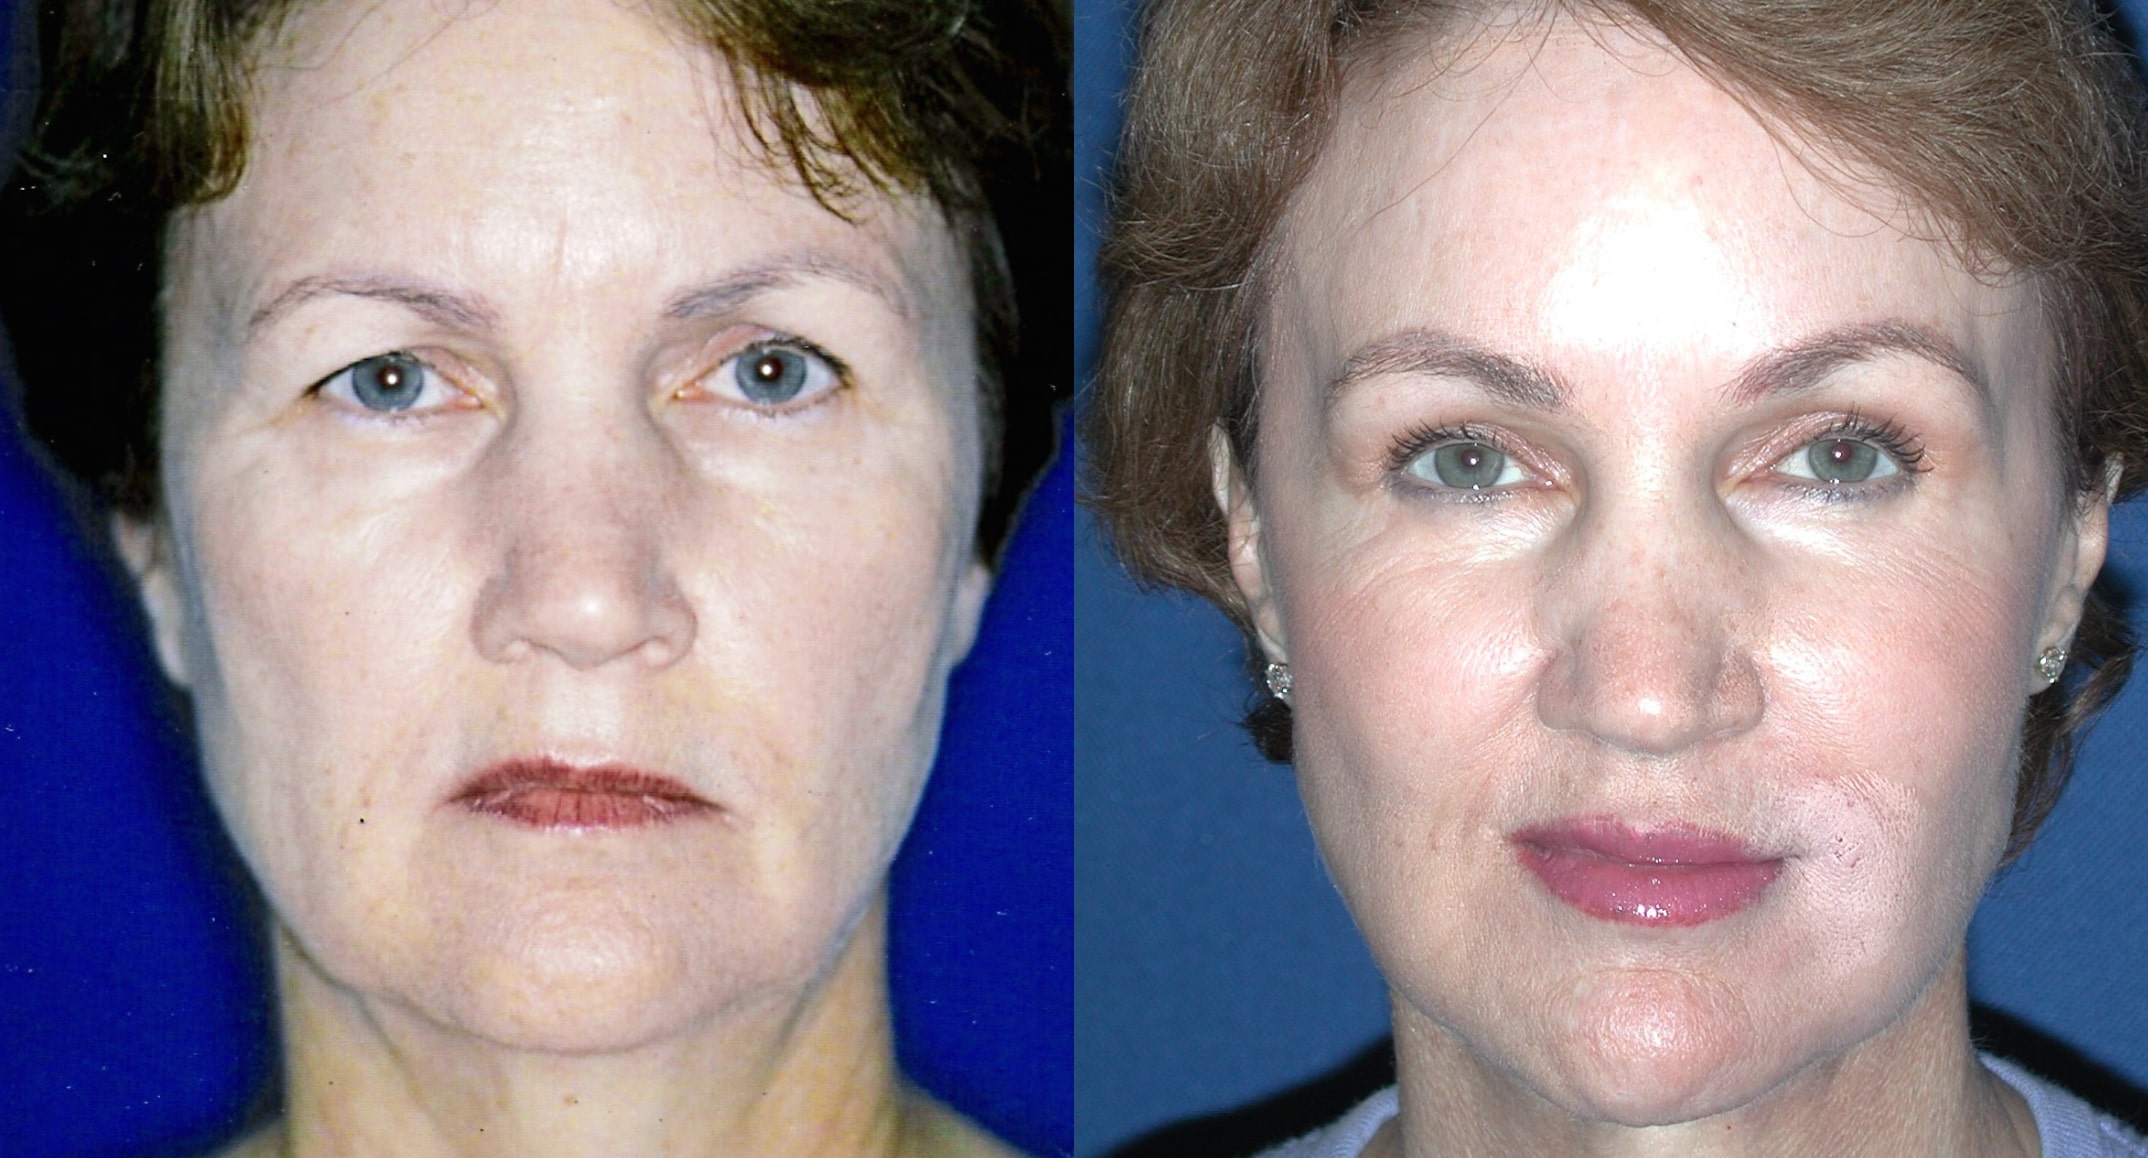 Lower facelift - before and after